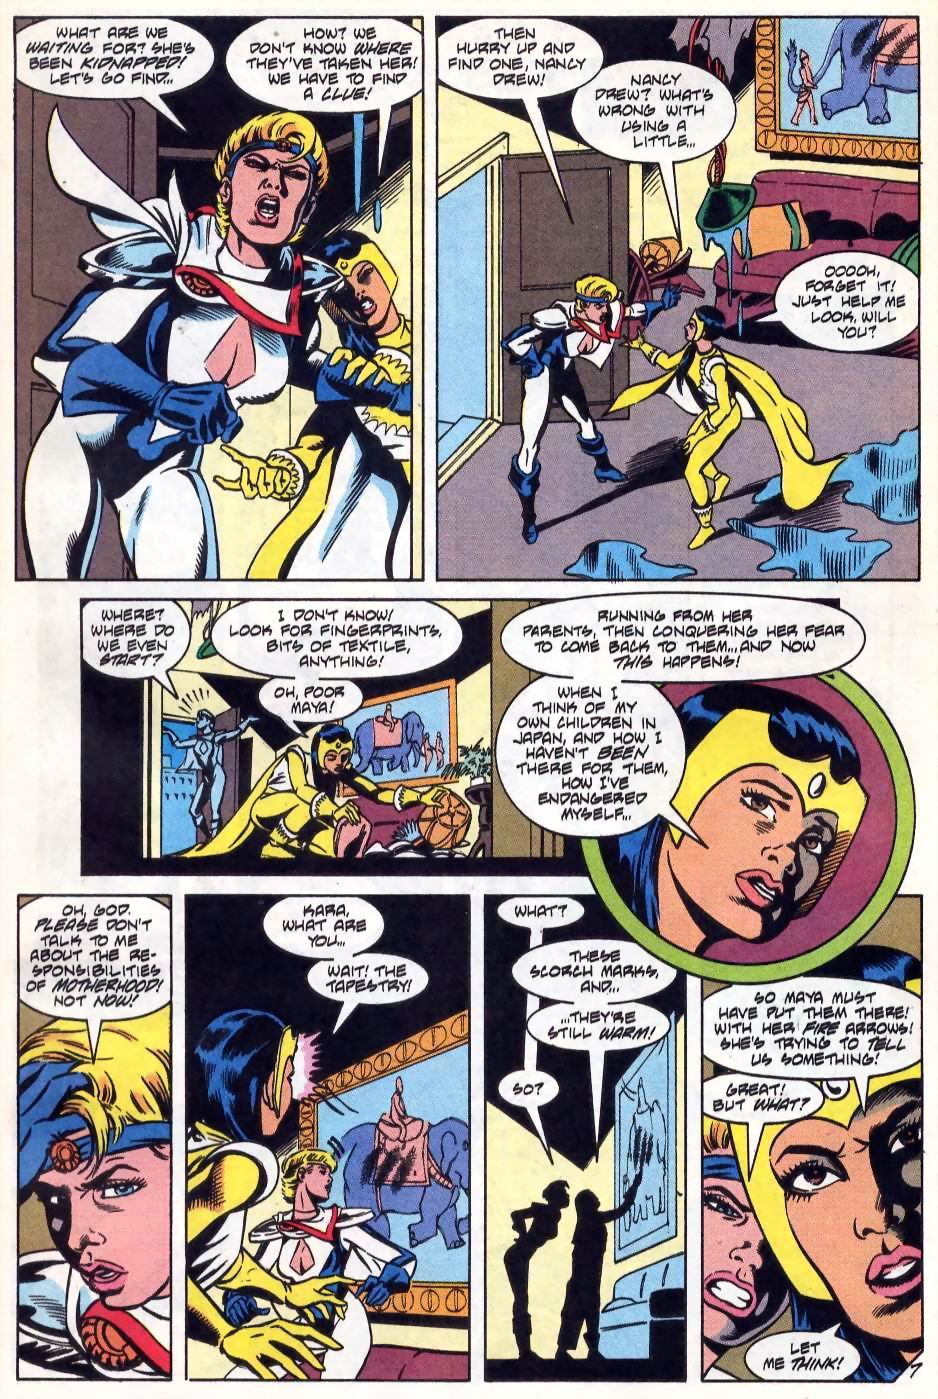 Justice League International (1993) 52 Page 7